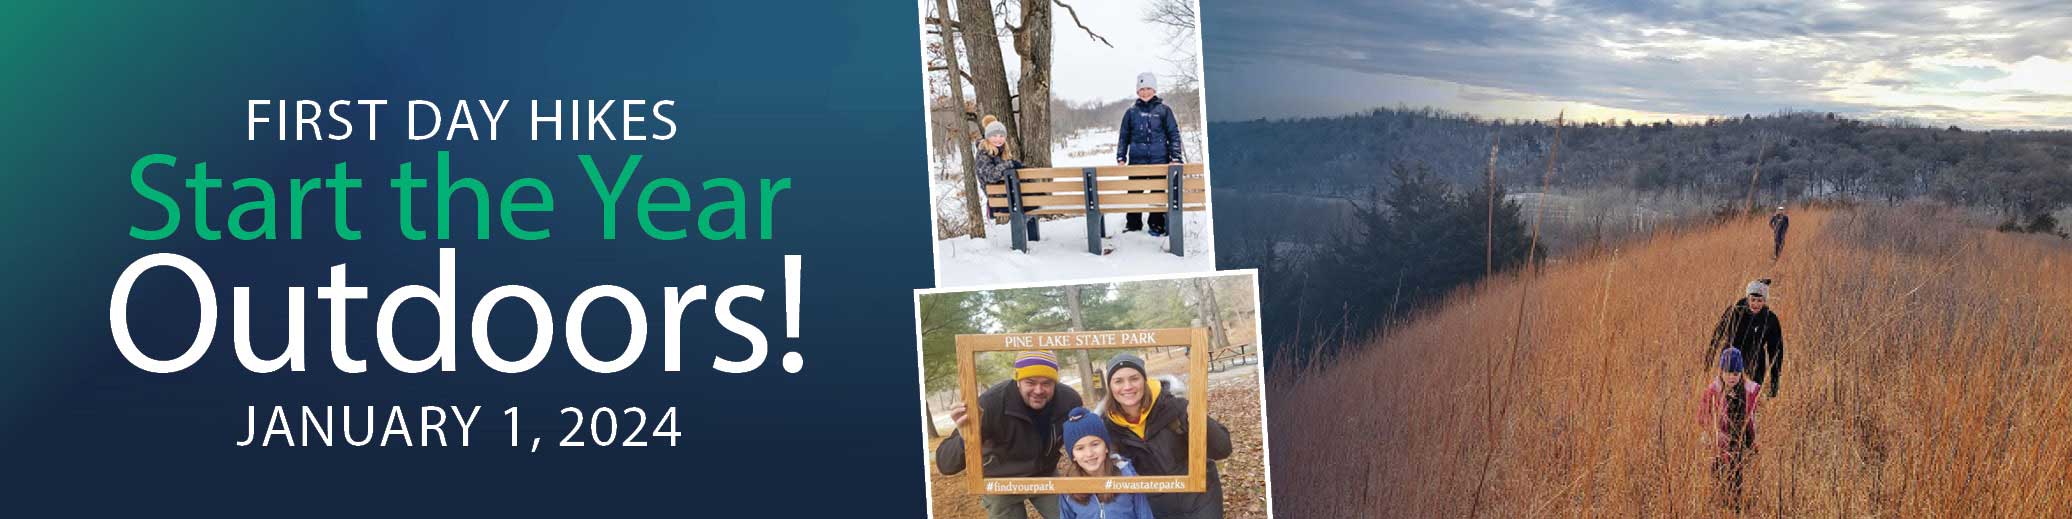 First Day Hikes, get Outdoors on January 1st!